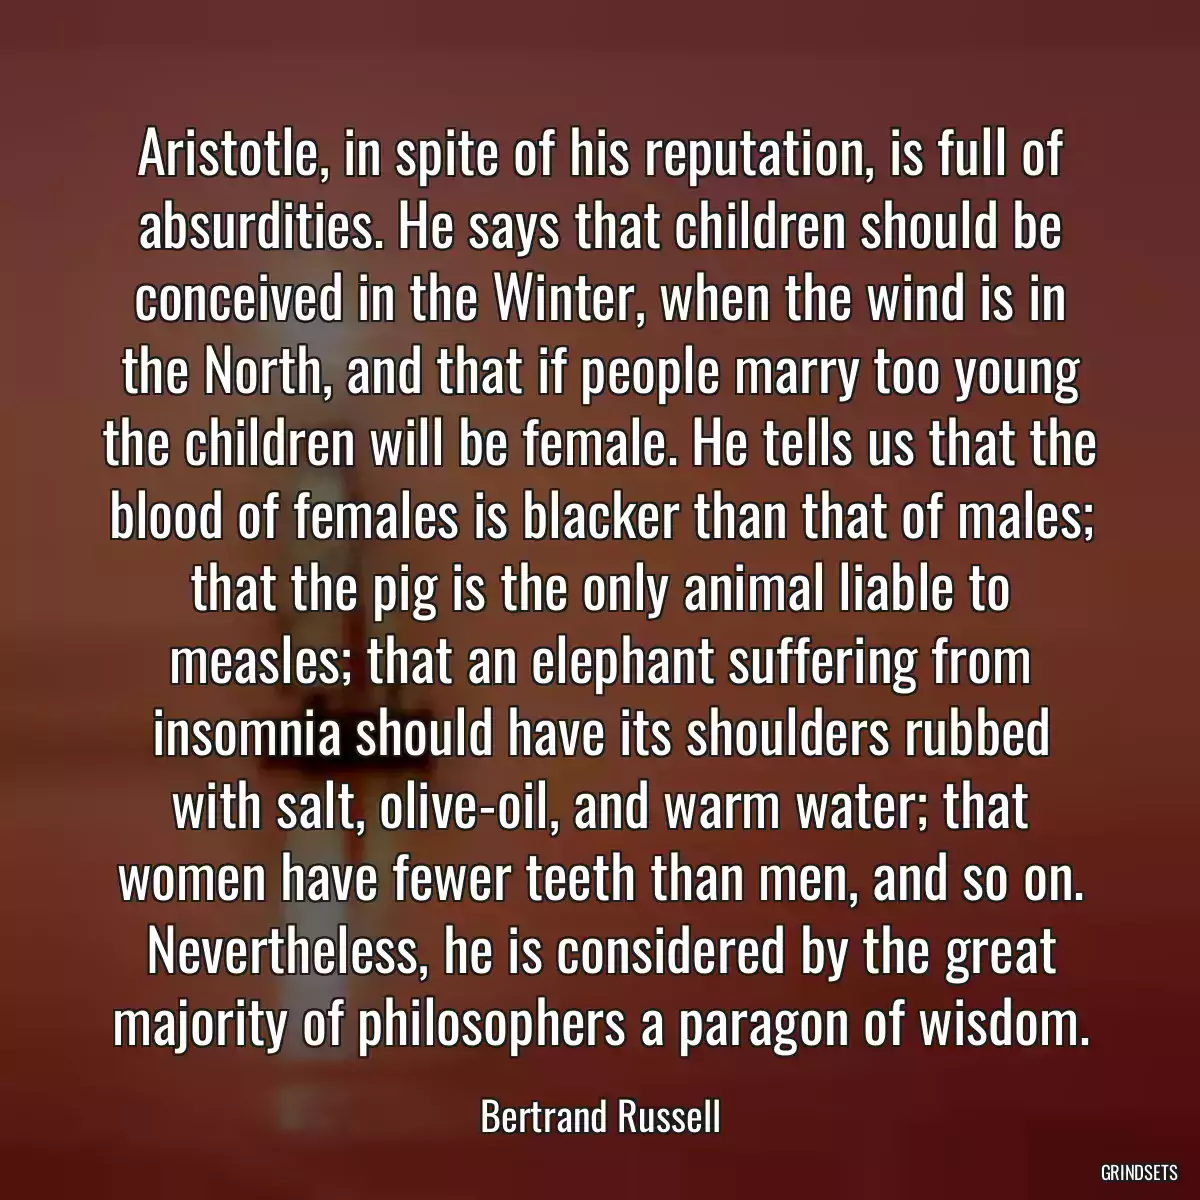 Aristotle, in spite of his reputation, is full of absurdities. He says that children should be conceived in the Winter, when the wind is in the North, and that if people marry too young the children will be female. He tells us that the blood of females is blacker than that of males; that the pig is the only animal liable to measles; that an elephant suffering from insomnia should have its shoulders rubbed with salt, olive-oil, and warm water; that women have fewer teeth than men, and so on. Nevertheless, he is considered by the great majority of philosophers a paragon of wisdom.